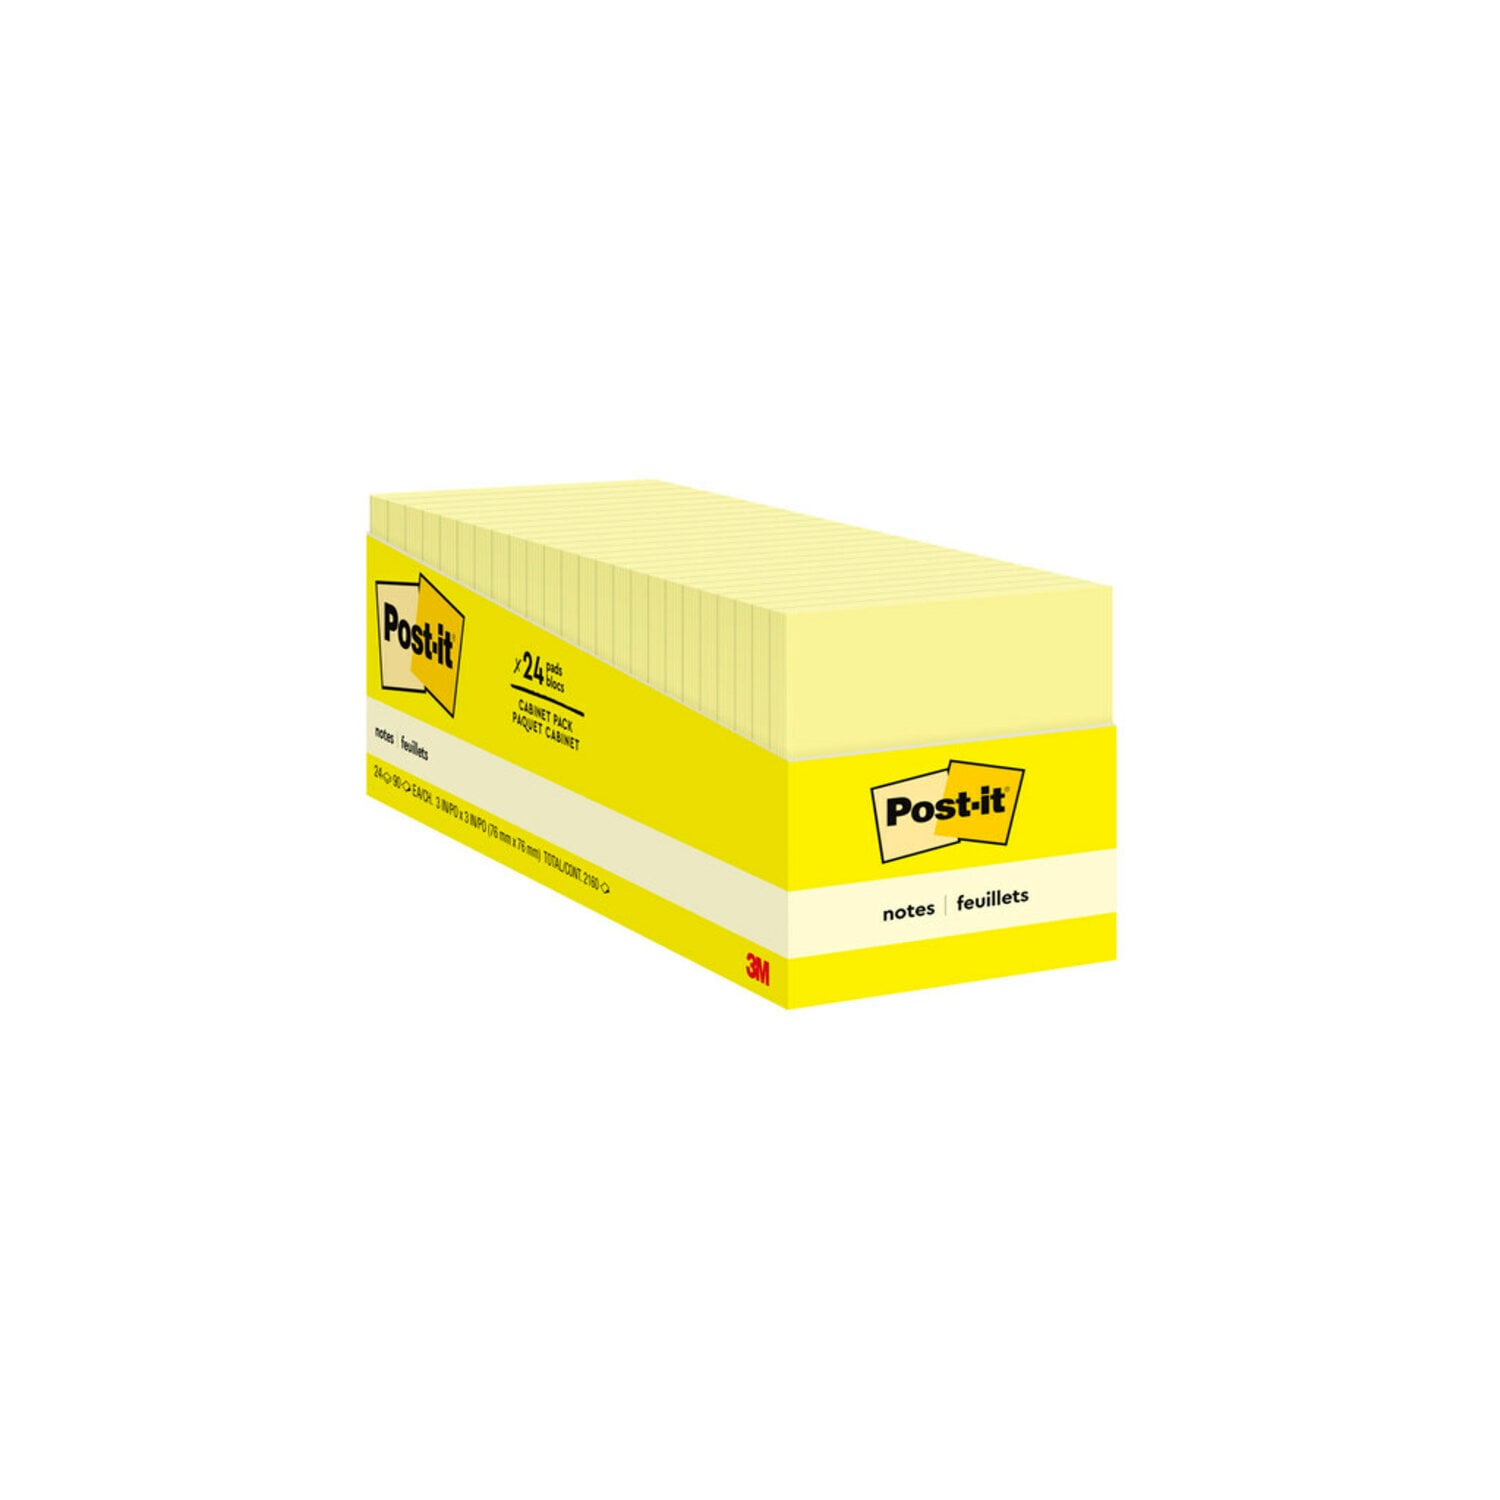 7100230103 - Post-it Notes 654-24CP, 3 in x 3 in (76 mm x 76 mm), Canary Yellow